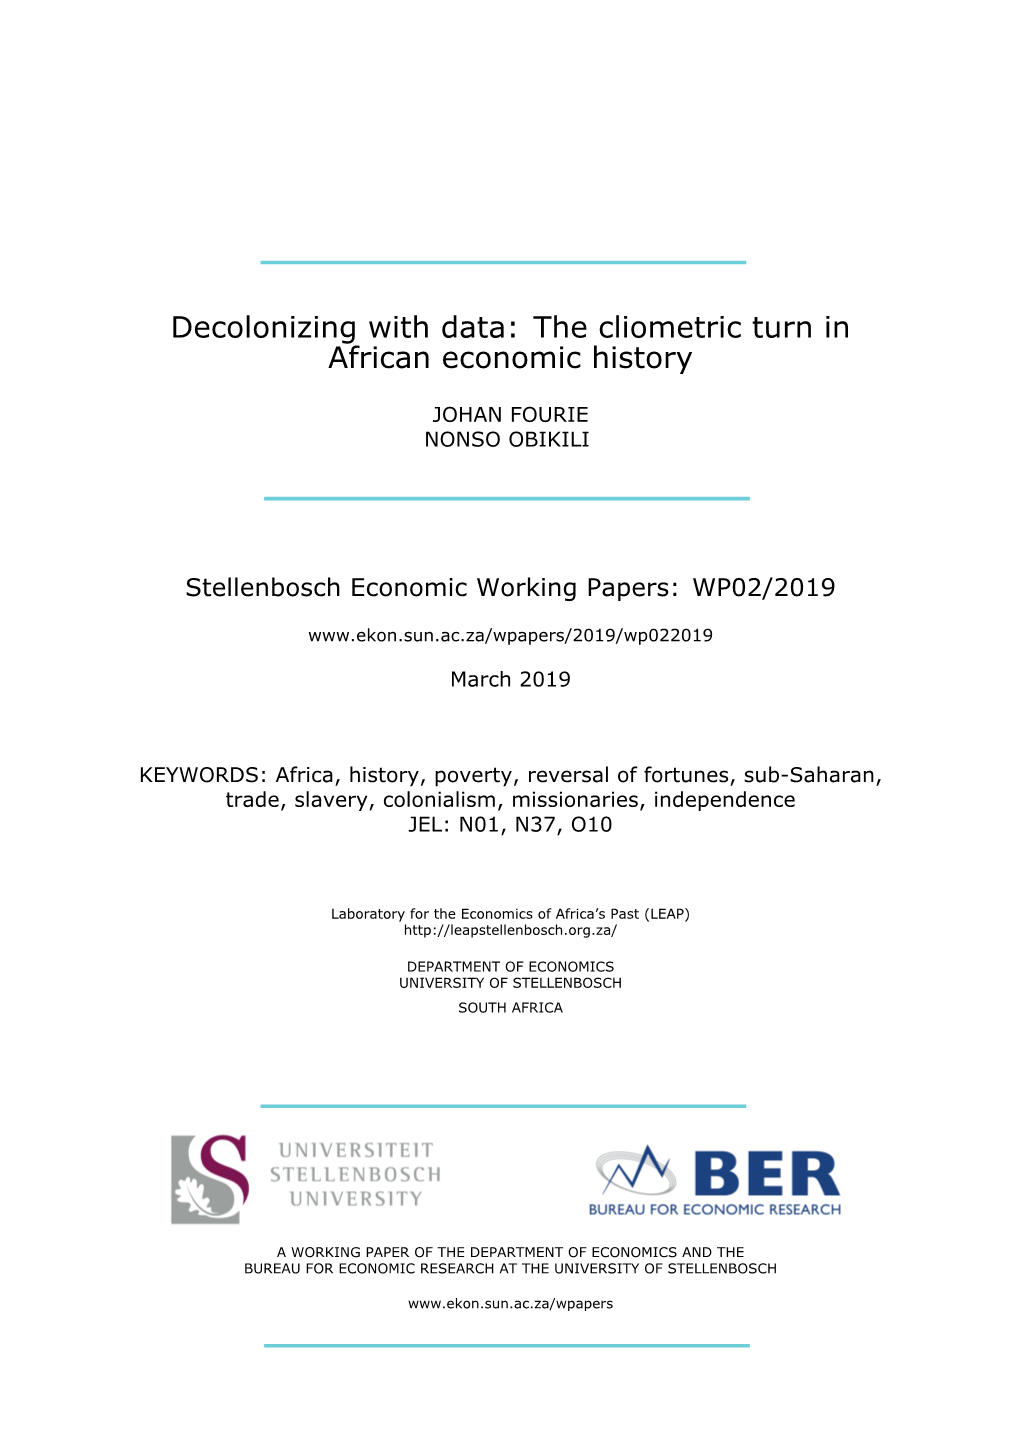 Decolonizing with Data: the Cliometric Turn in African Economic History